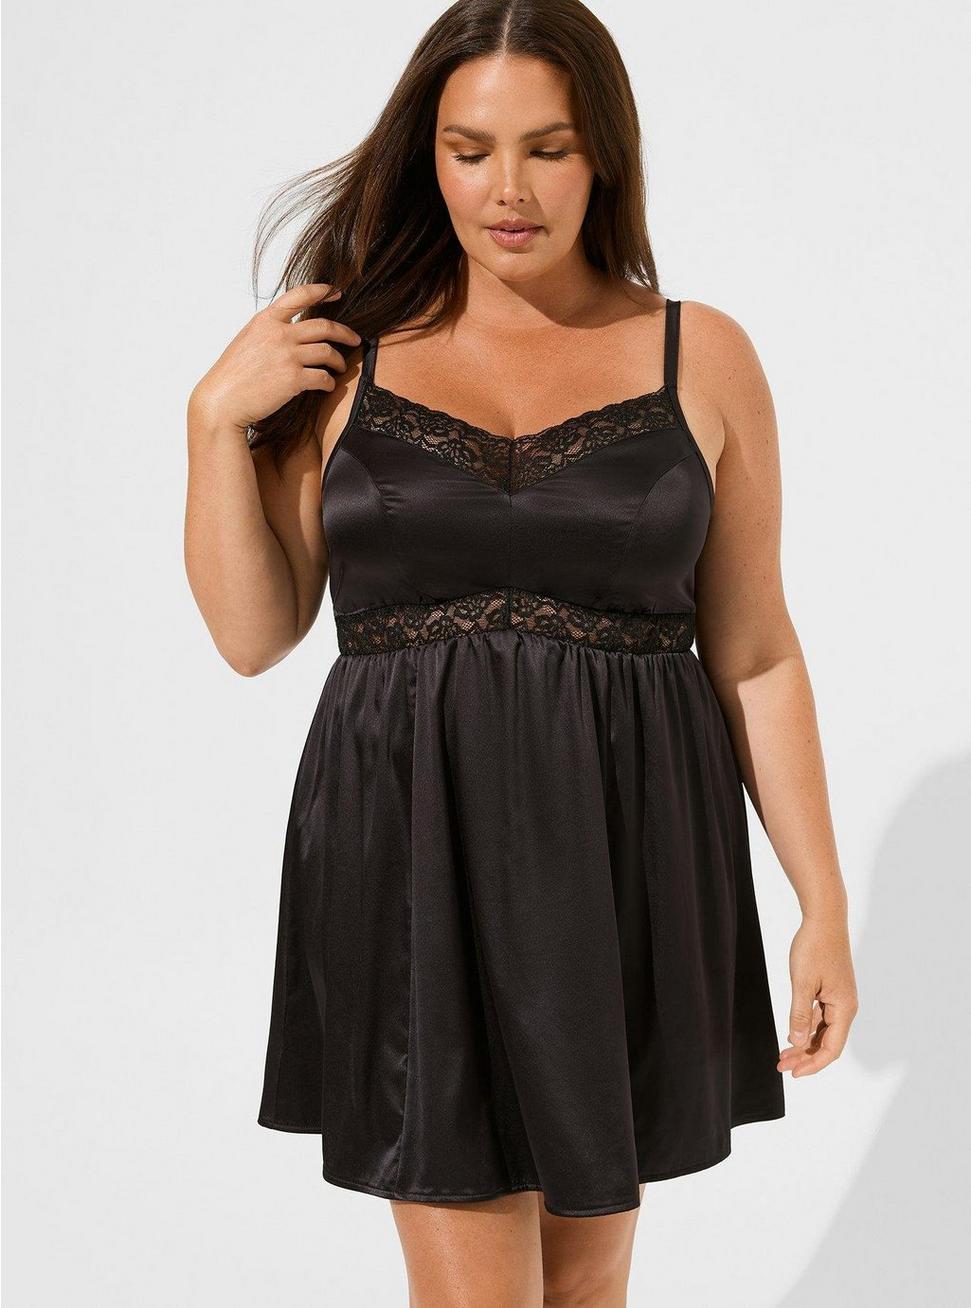 Lace-up Plus Size Babydoll – Curve and Twist